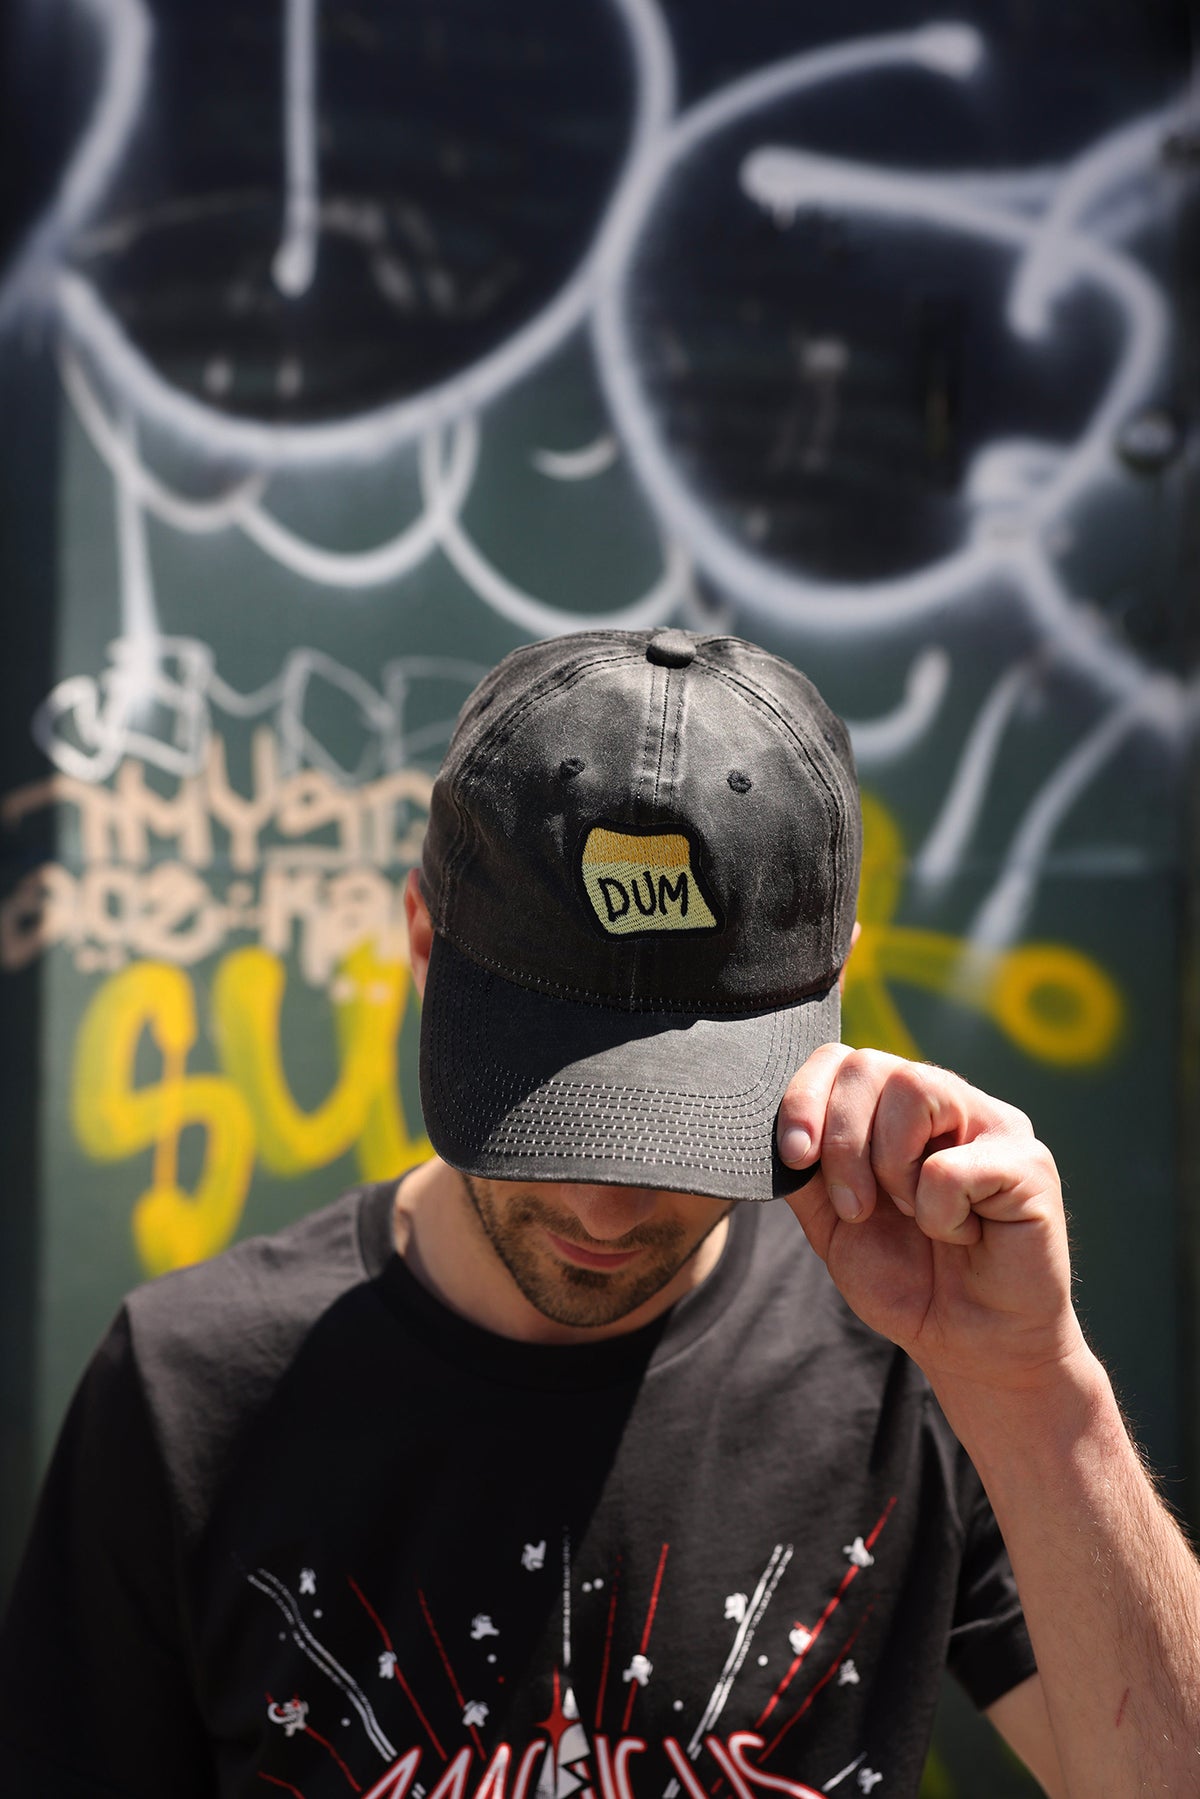 A photograph of the top of a model’s head showing off the brown DUM hat. Their chin is tilted downward so you can see the full view of the yellow “DUM” sticky note embroidery.